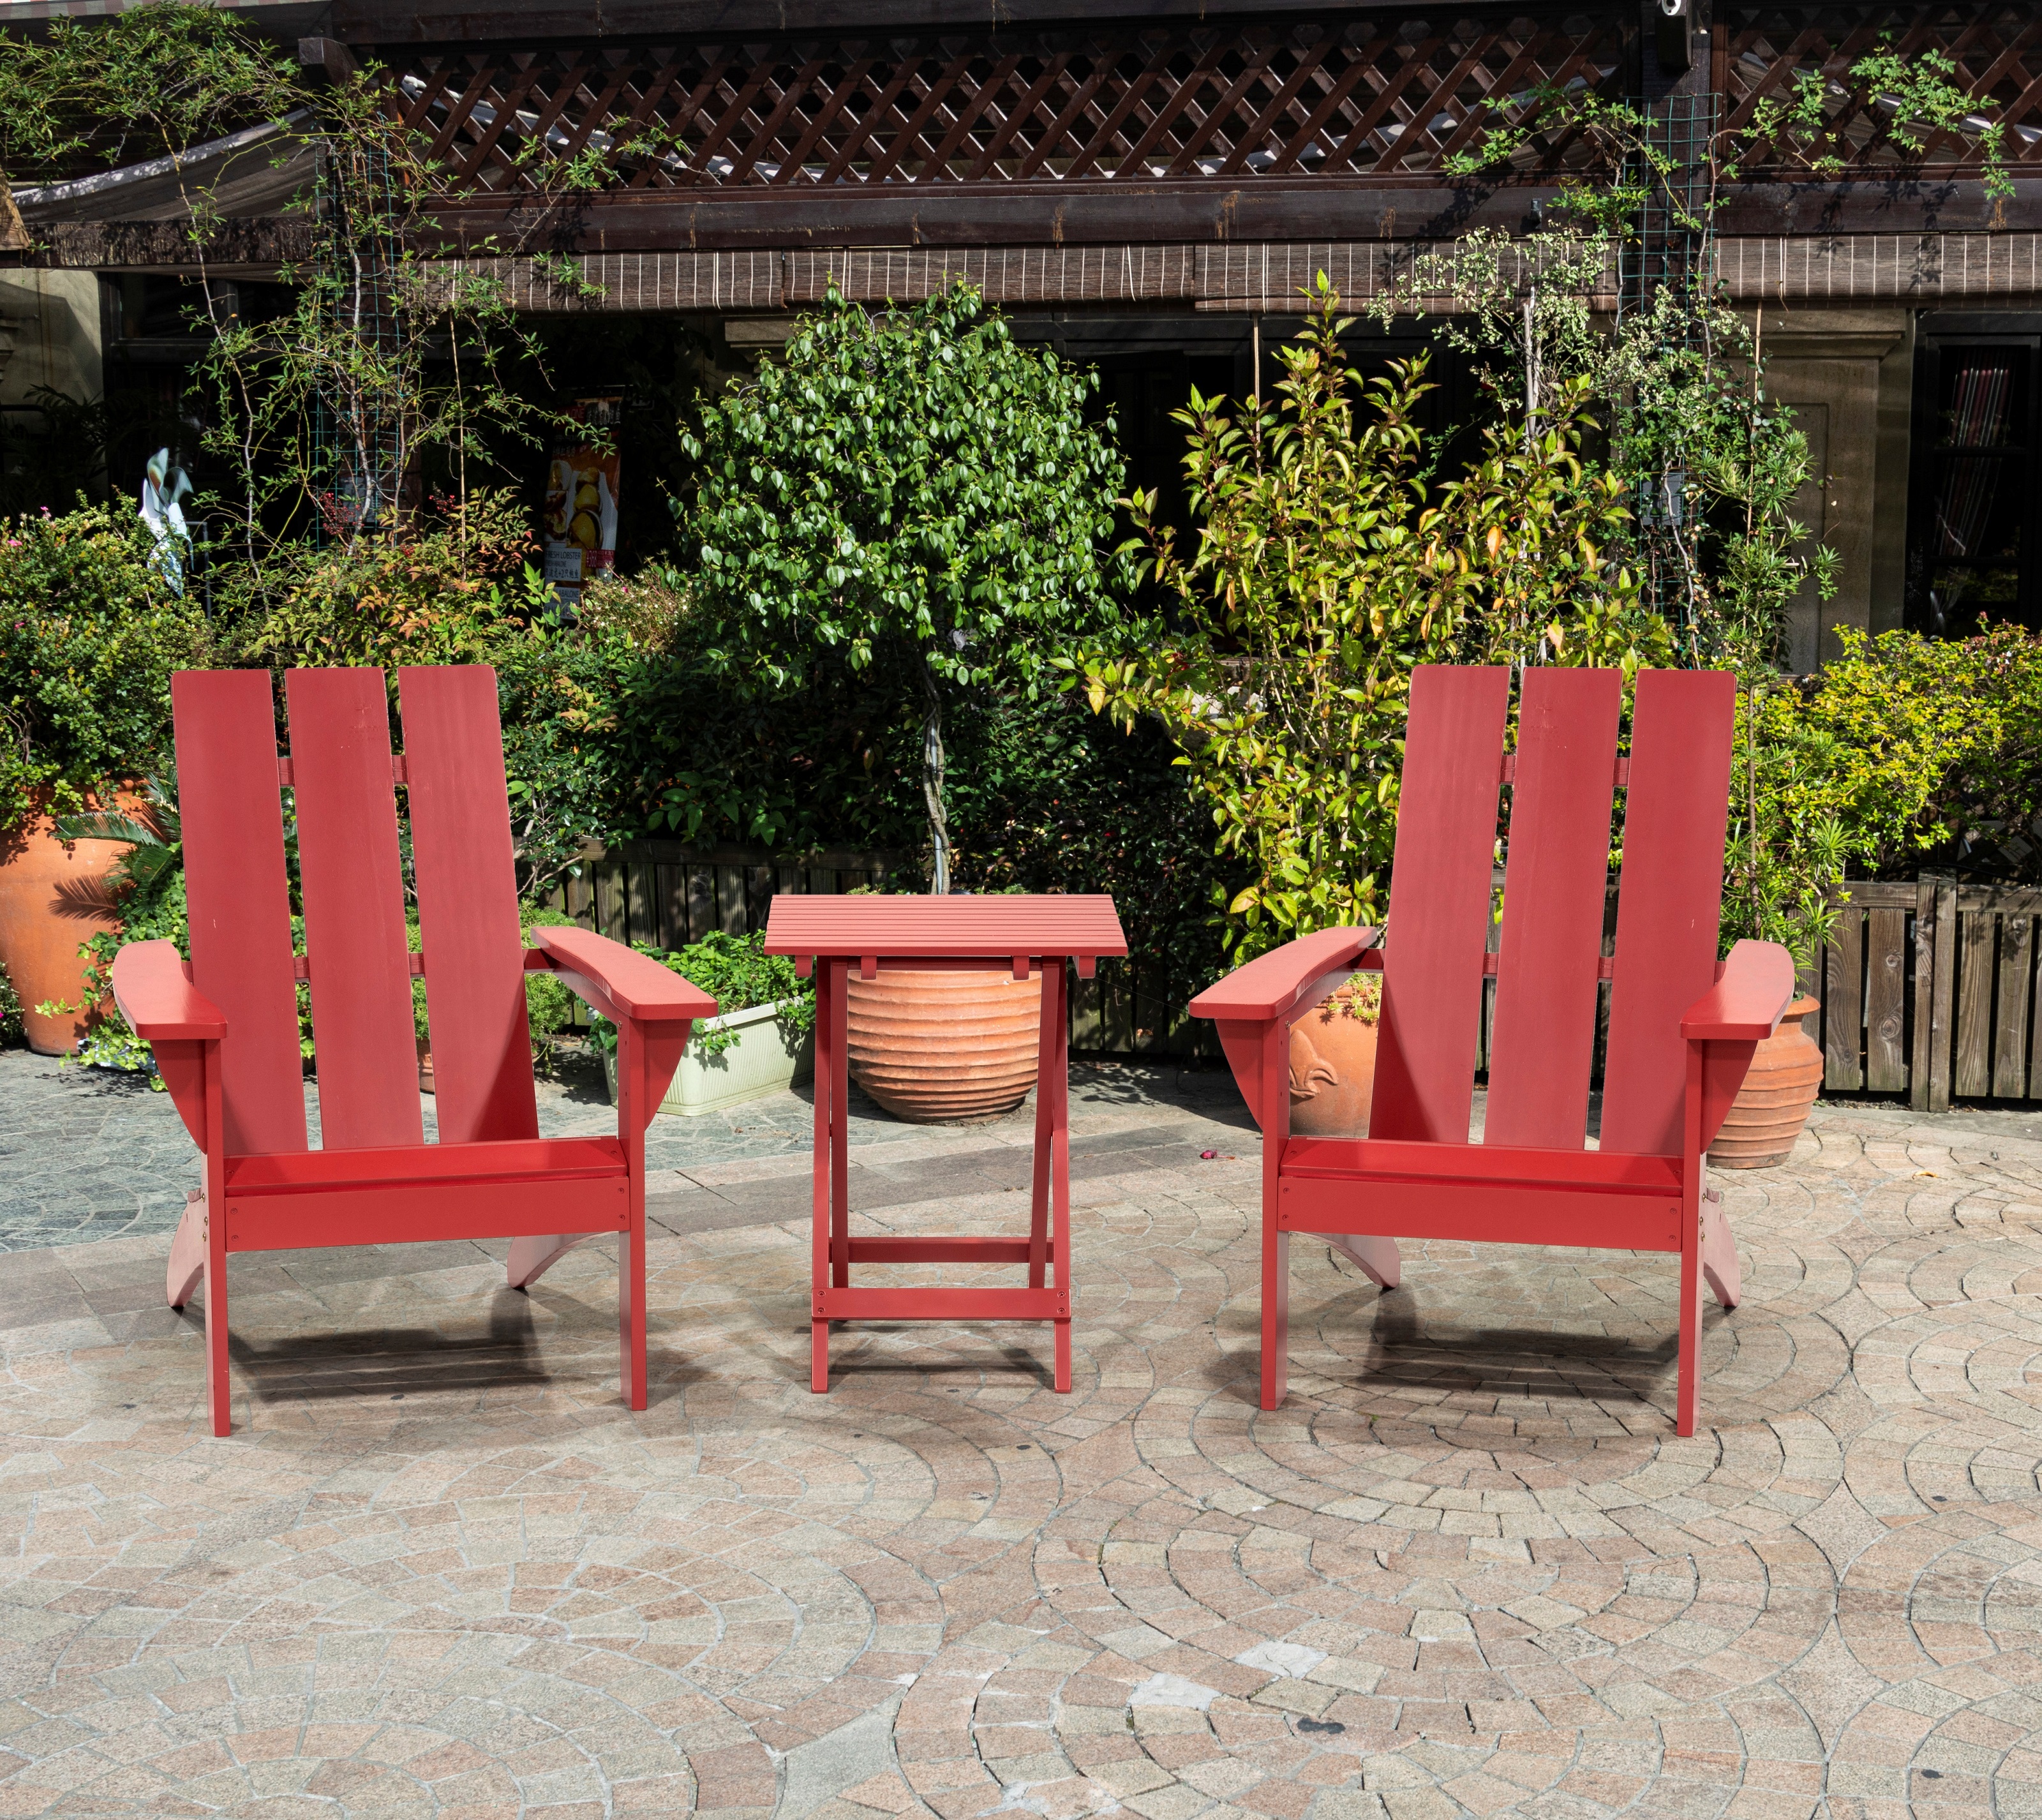 Outdoor Patio Garden Furniture 3-Piece Wood Adirondack Chair Set, Weather Resistant Finish,2 Adirondack Chairs and 1 Side Table-Red - image 1 of 11